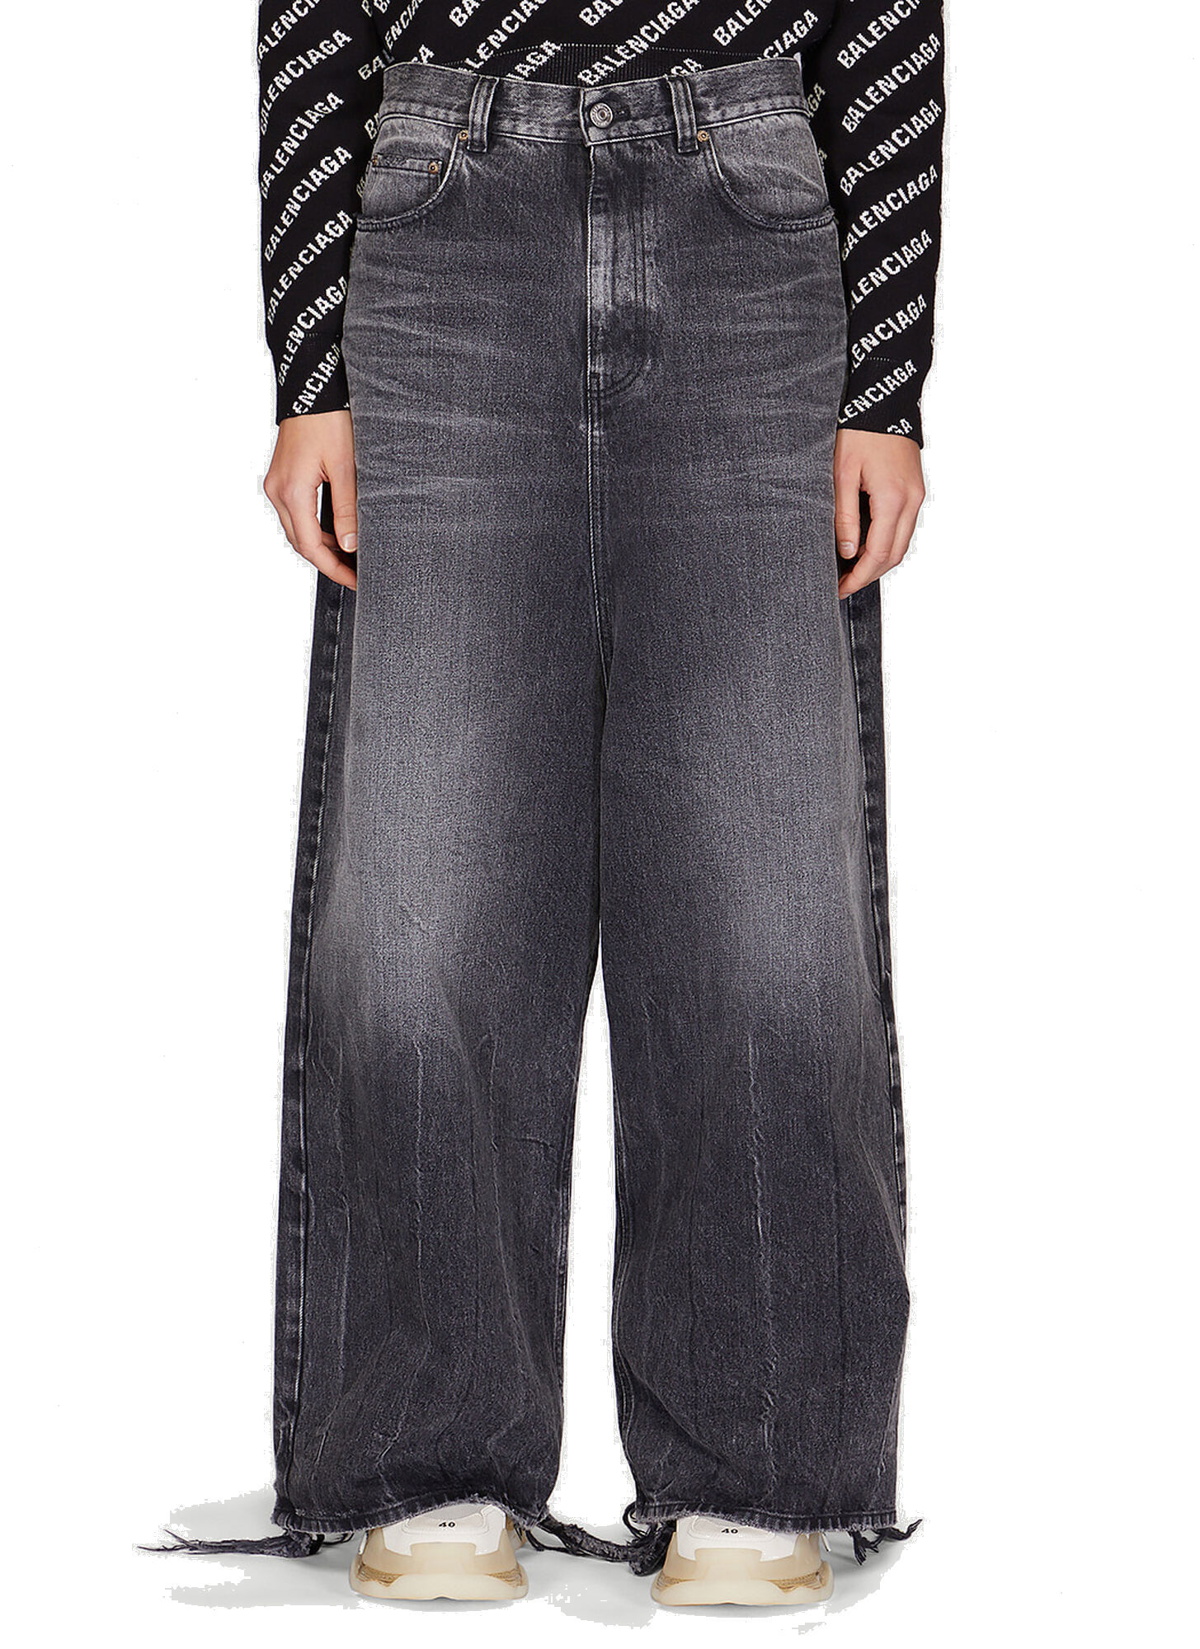 Destroyed Low Crotch Jeans in Black Balenciaga